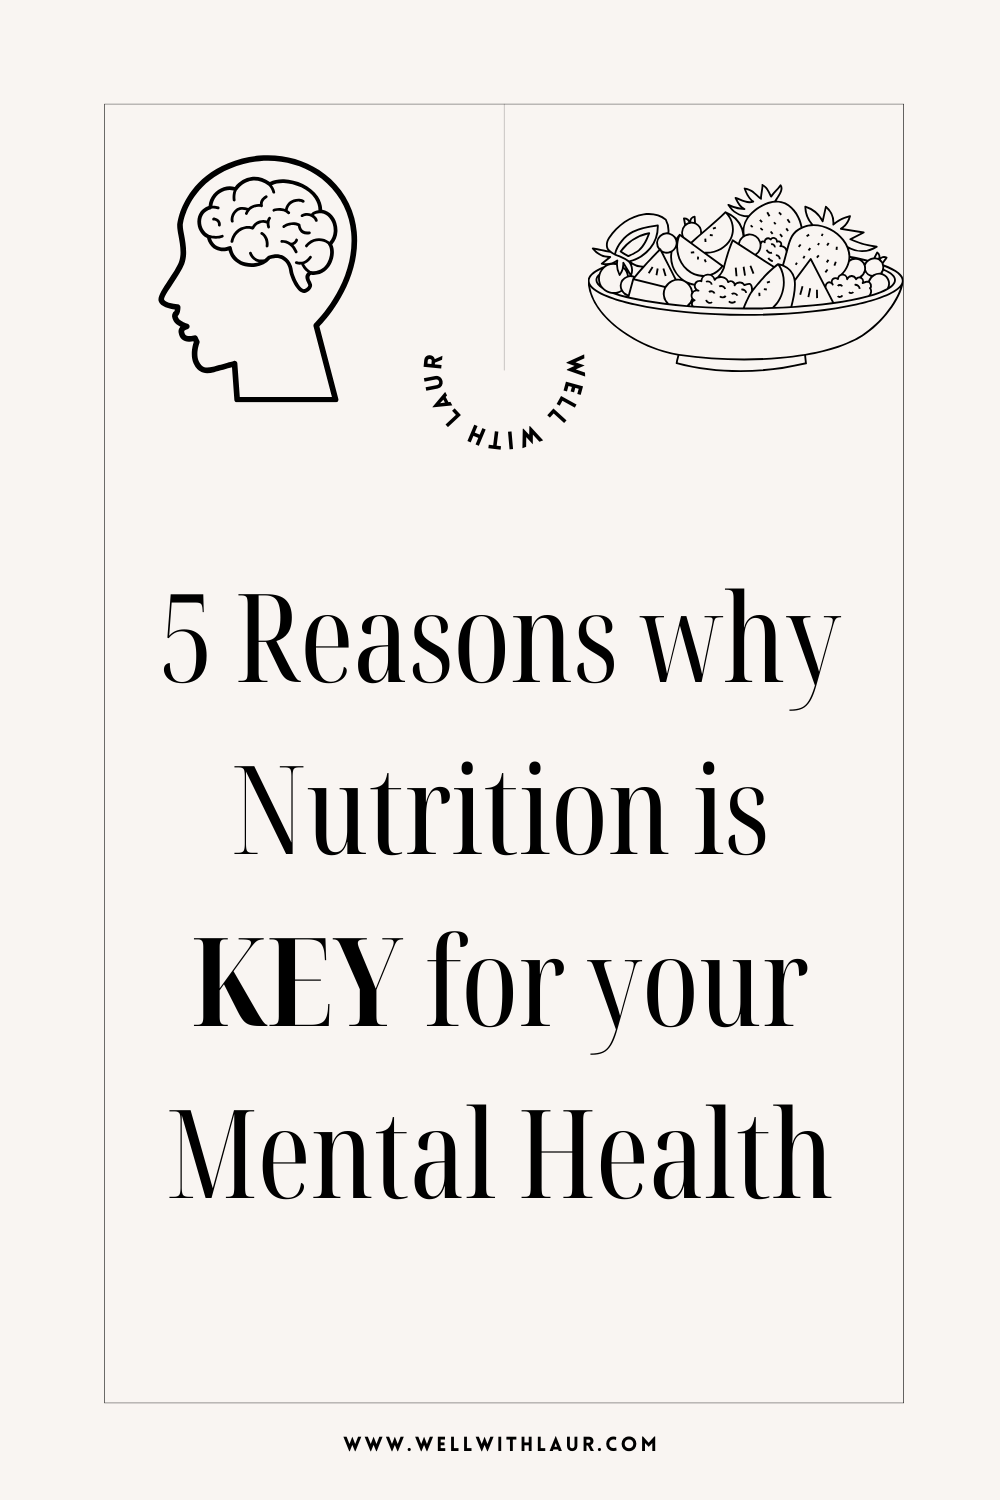 5 Reasons Why Nutrition is Key for your Mental Health